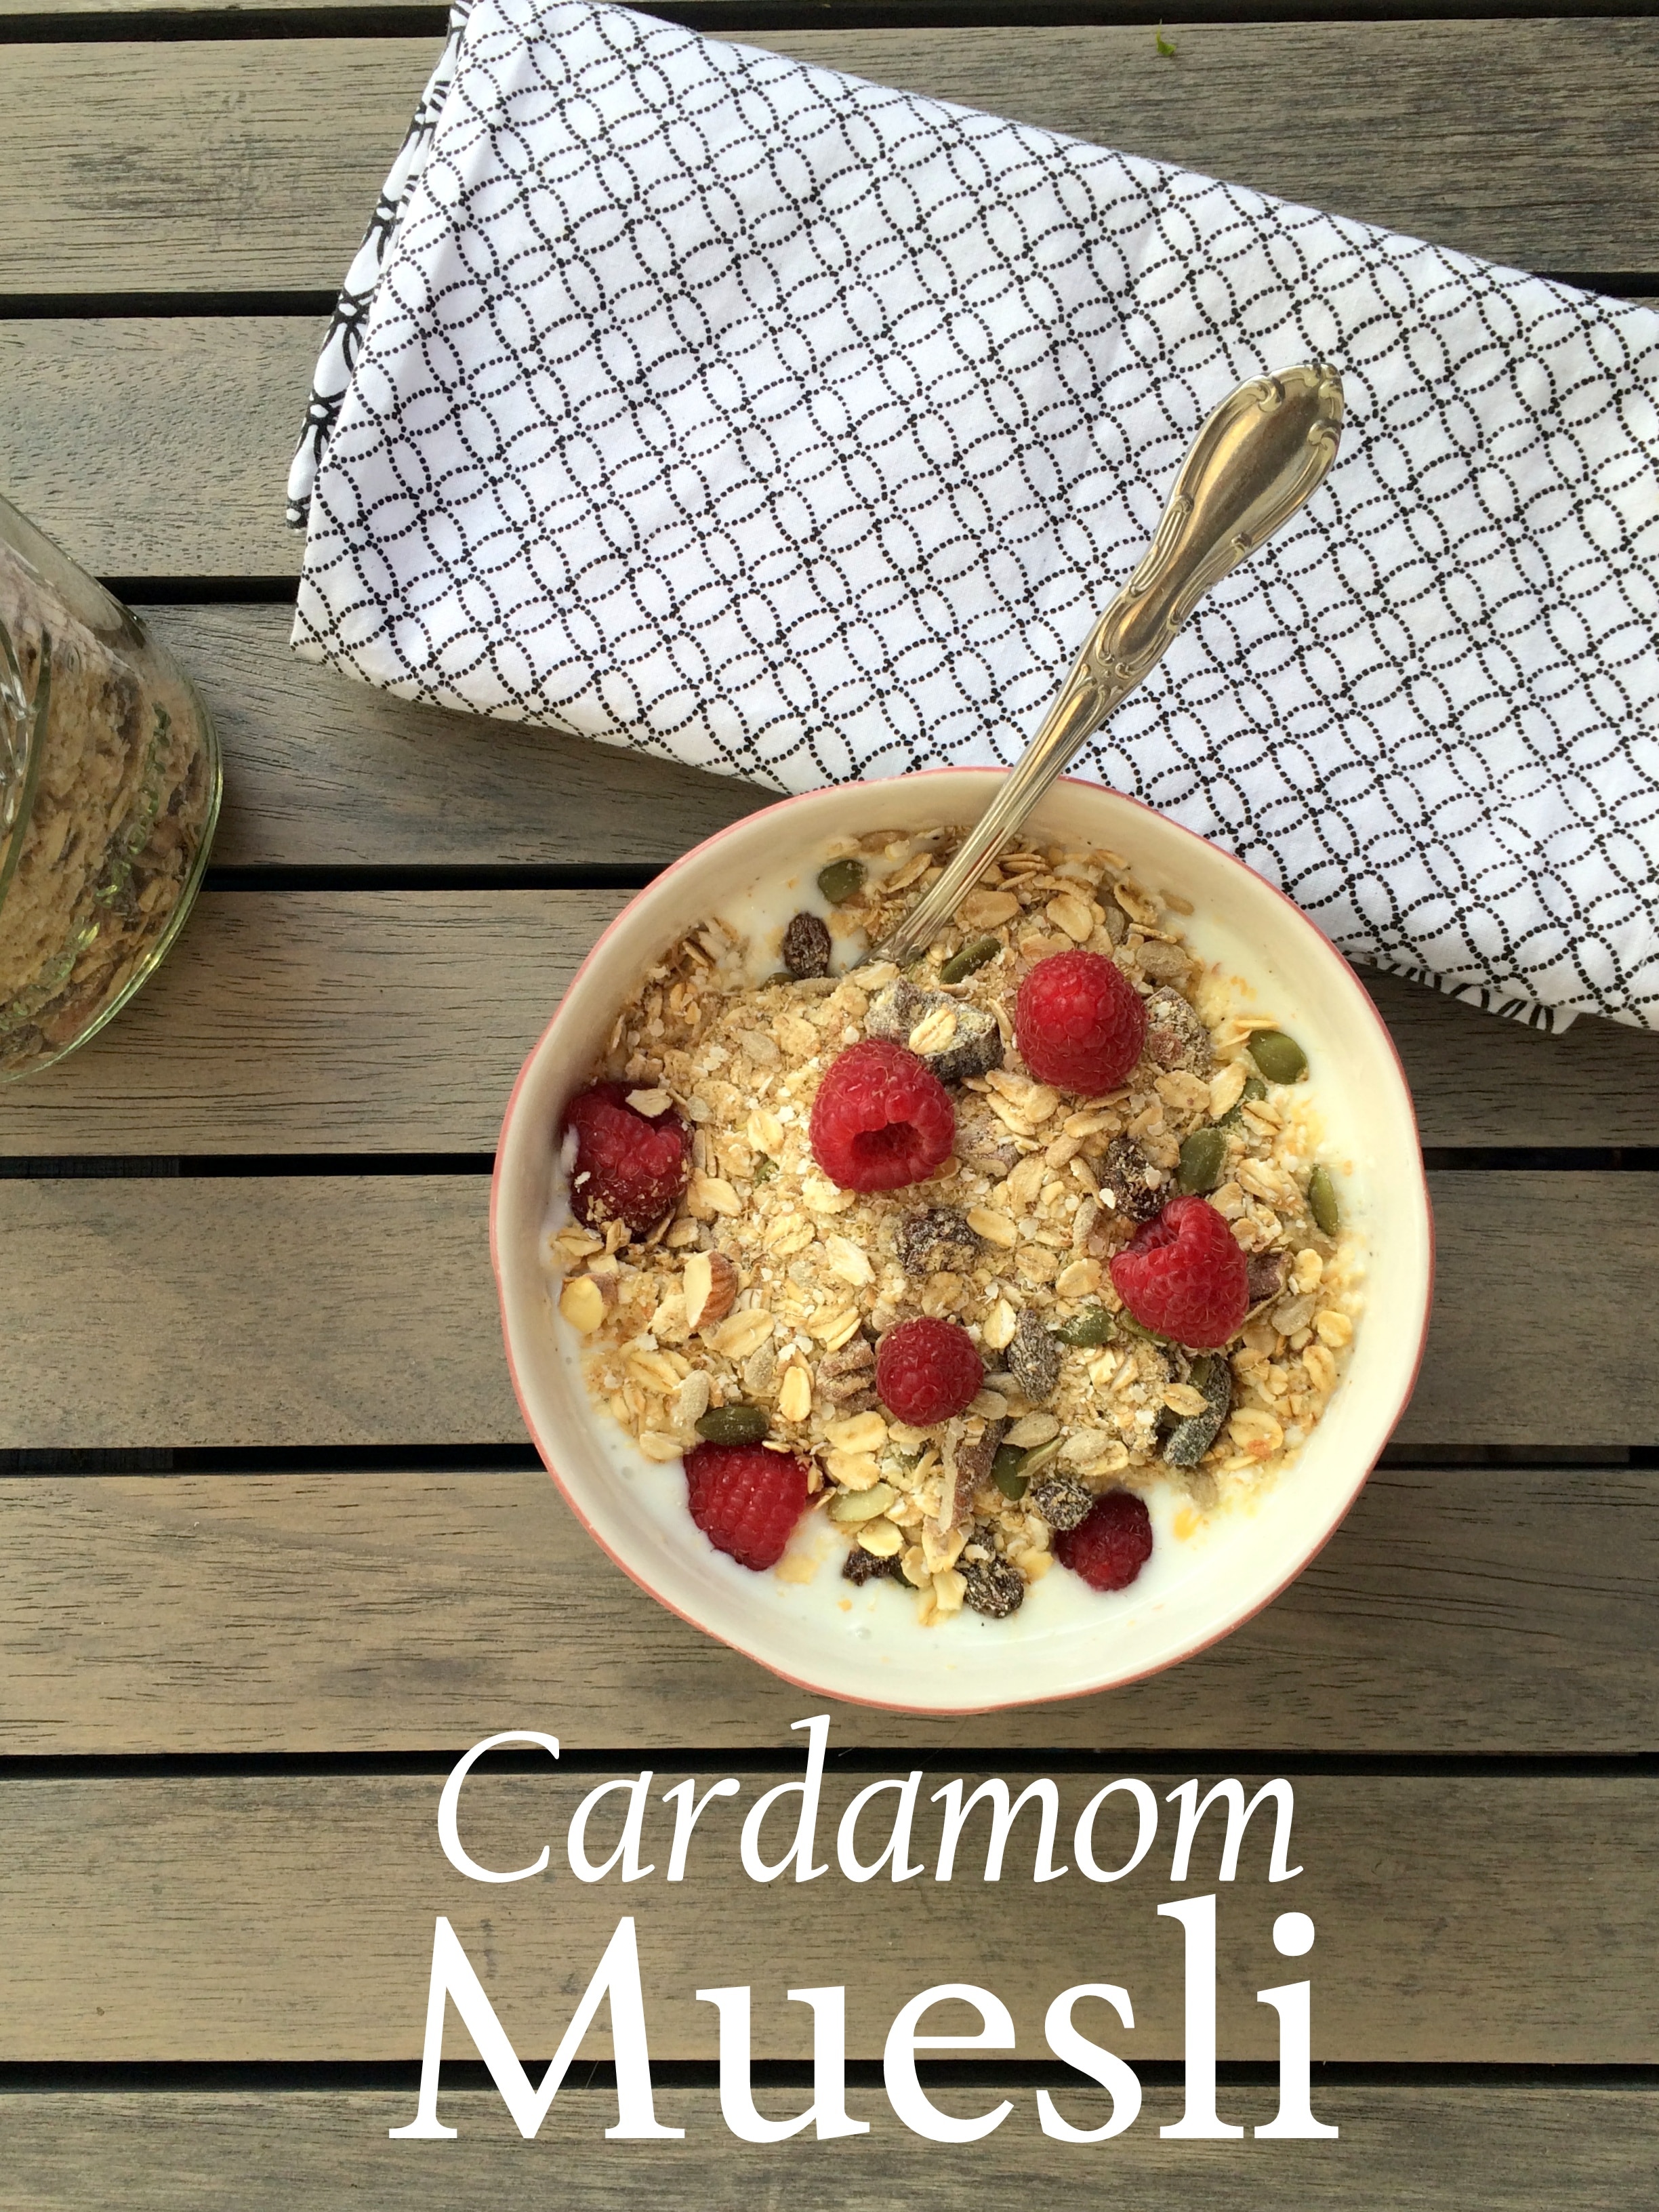 This cardamom muesli is the perfect warm weather cereal. Just add it to your favorite cultured milk, plant based milk, or yogurt, top with fresh berries, stir and enjoy. Packed with whole grains and easily made gluten-free. From halsanutrition.com